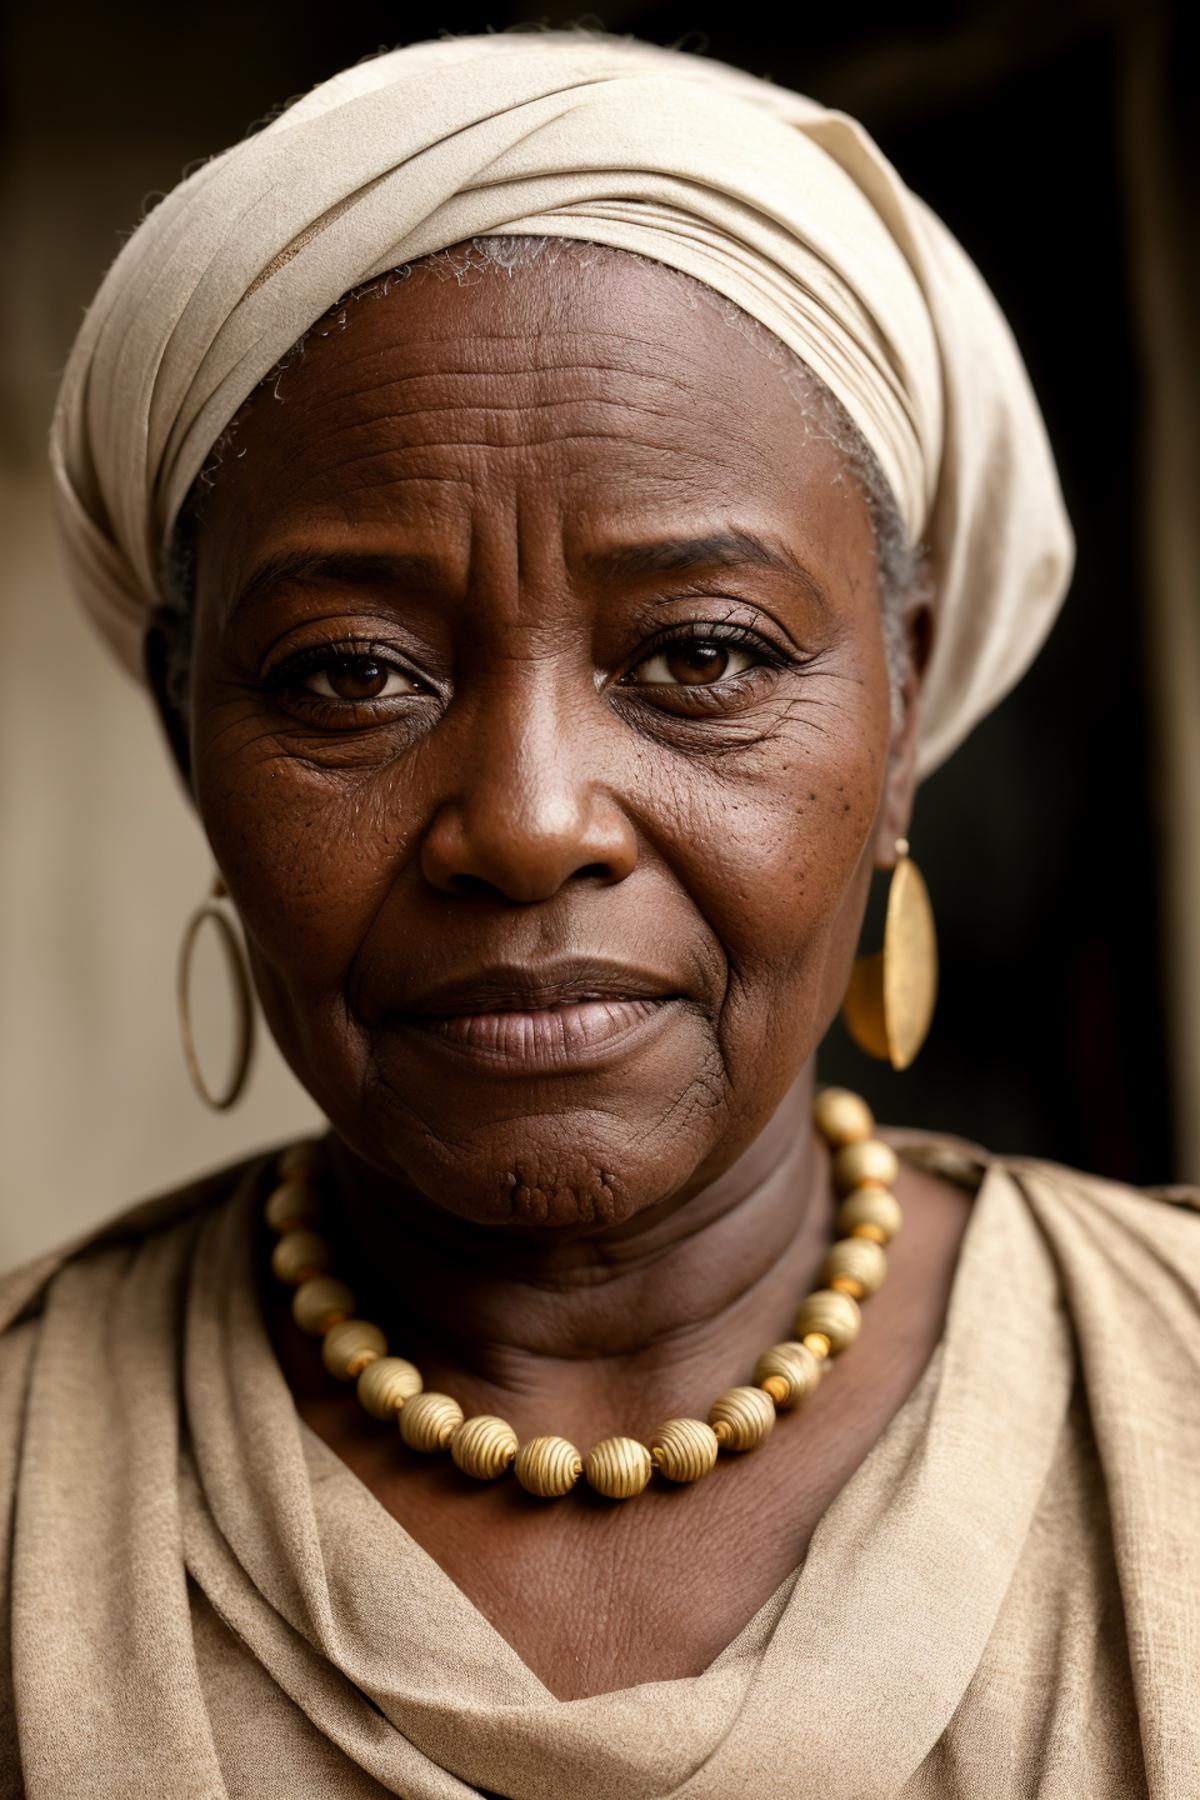 A close-up of an older woman wearing a white head wrap and a gold necklace.